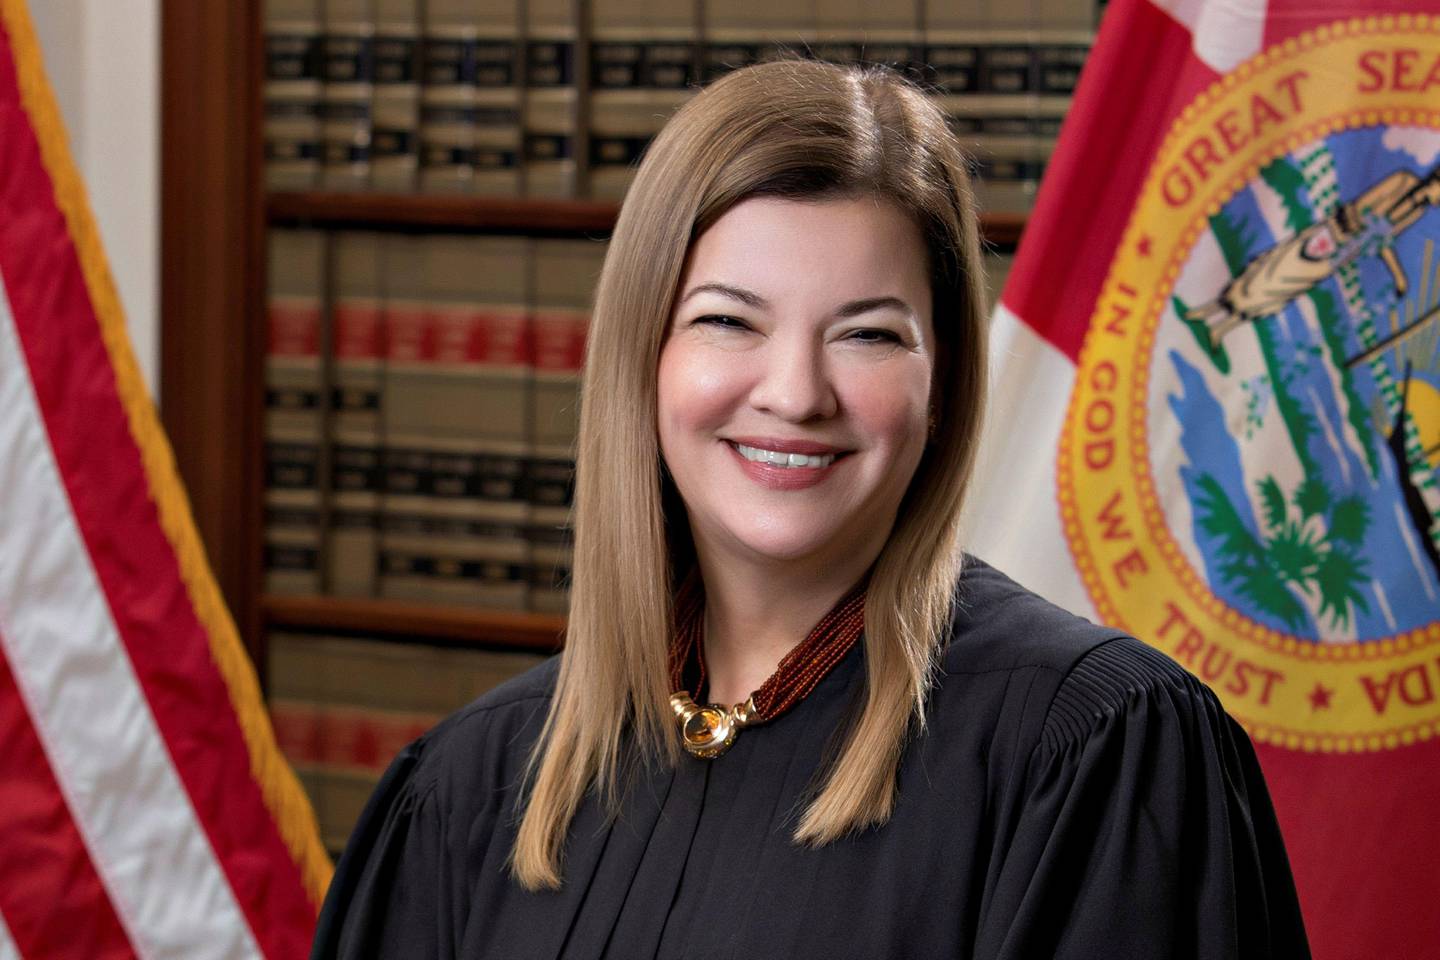 FILE PHOTO: Florida Supreme Court Justice Barbara Lagoa, currently a United States Circuit Judge of the United States Court of Appeals for the Eleventh Circuit, poses in a photograph from 2019 obtained Sept. 19, 2020.  Florida Supreme Court/Handout via REUTERS.  NO RESALES. NO ARCHIVES. THIS IMAGE HAS BEEN SUPPLIED BY A THIRD PARTY. THIS IMAGE WAS PROCESSED BY REUTERS TO ENHANCE QUALITY, AN UNPROCESSED VERSION HAS BEEN PROVIDED SEPARATELY./File Photo